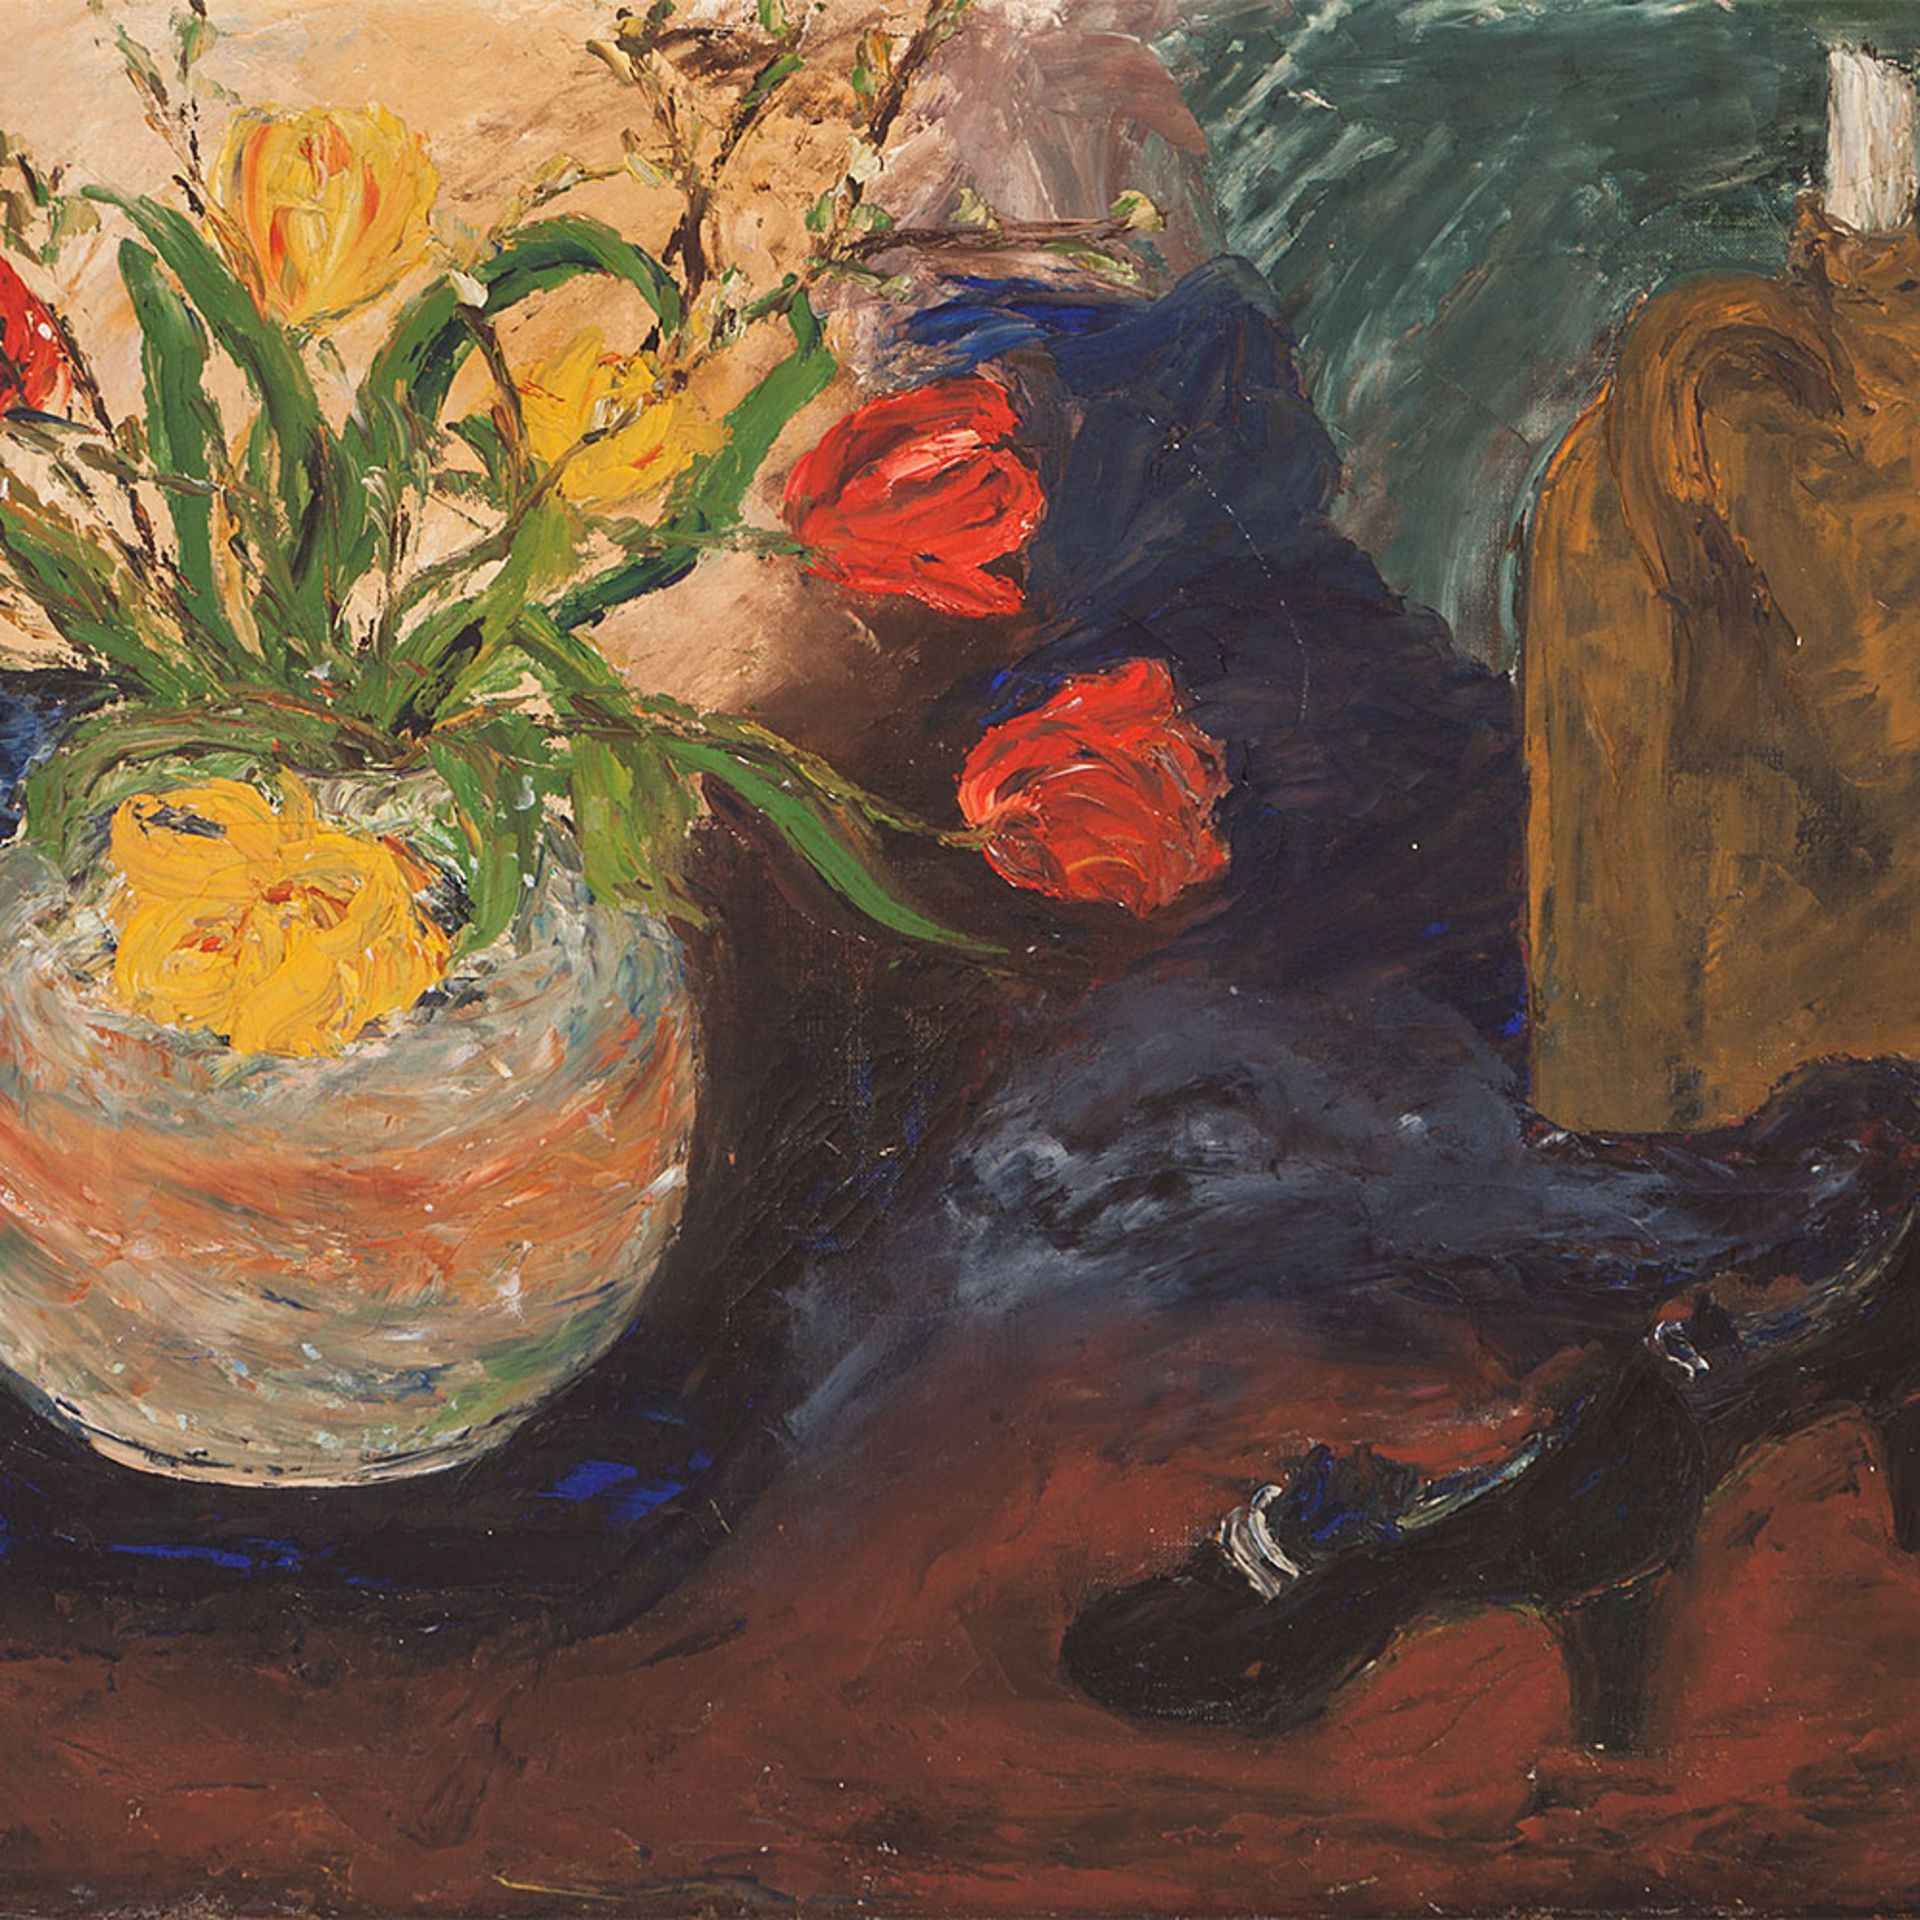 Lilly Ørum, Oil Painting, Flower Still Life with Shoes, 1938 - Image 8 of 8